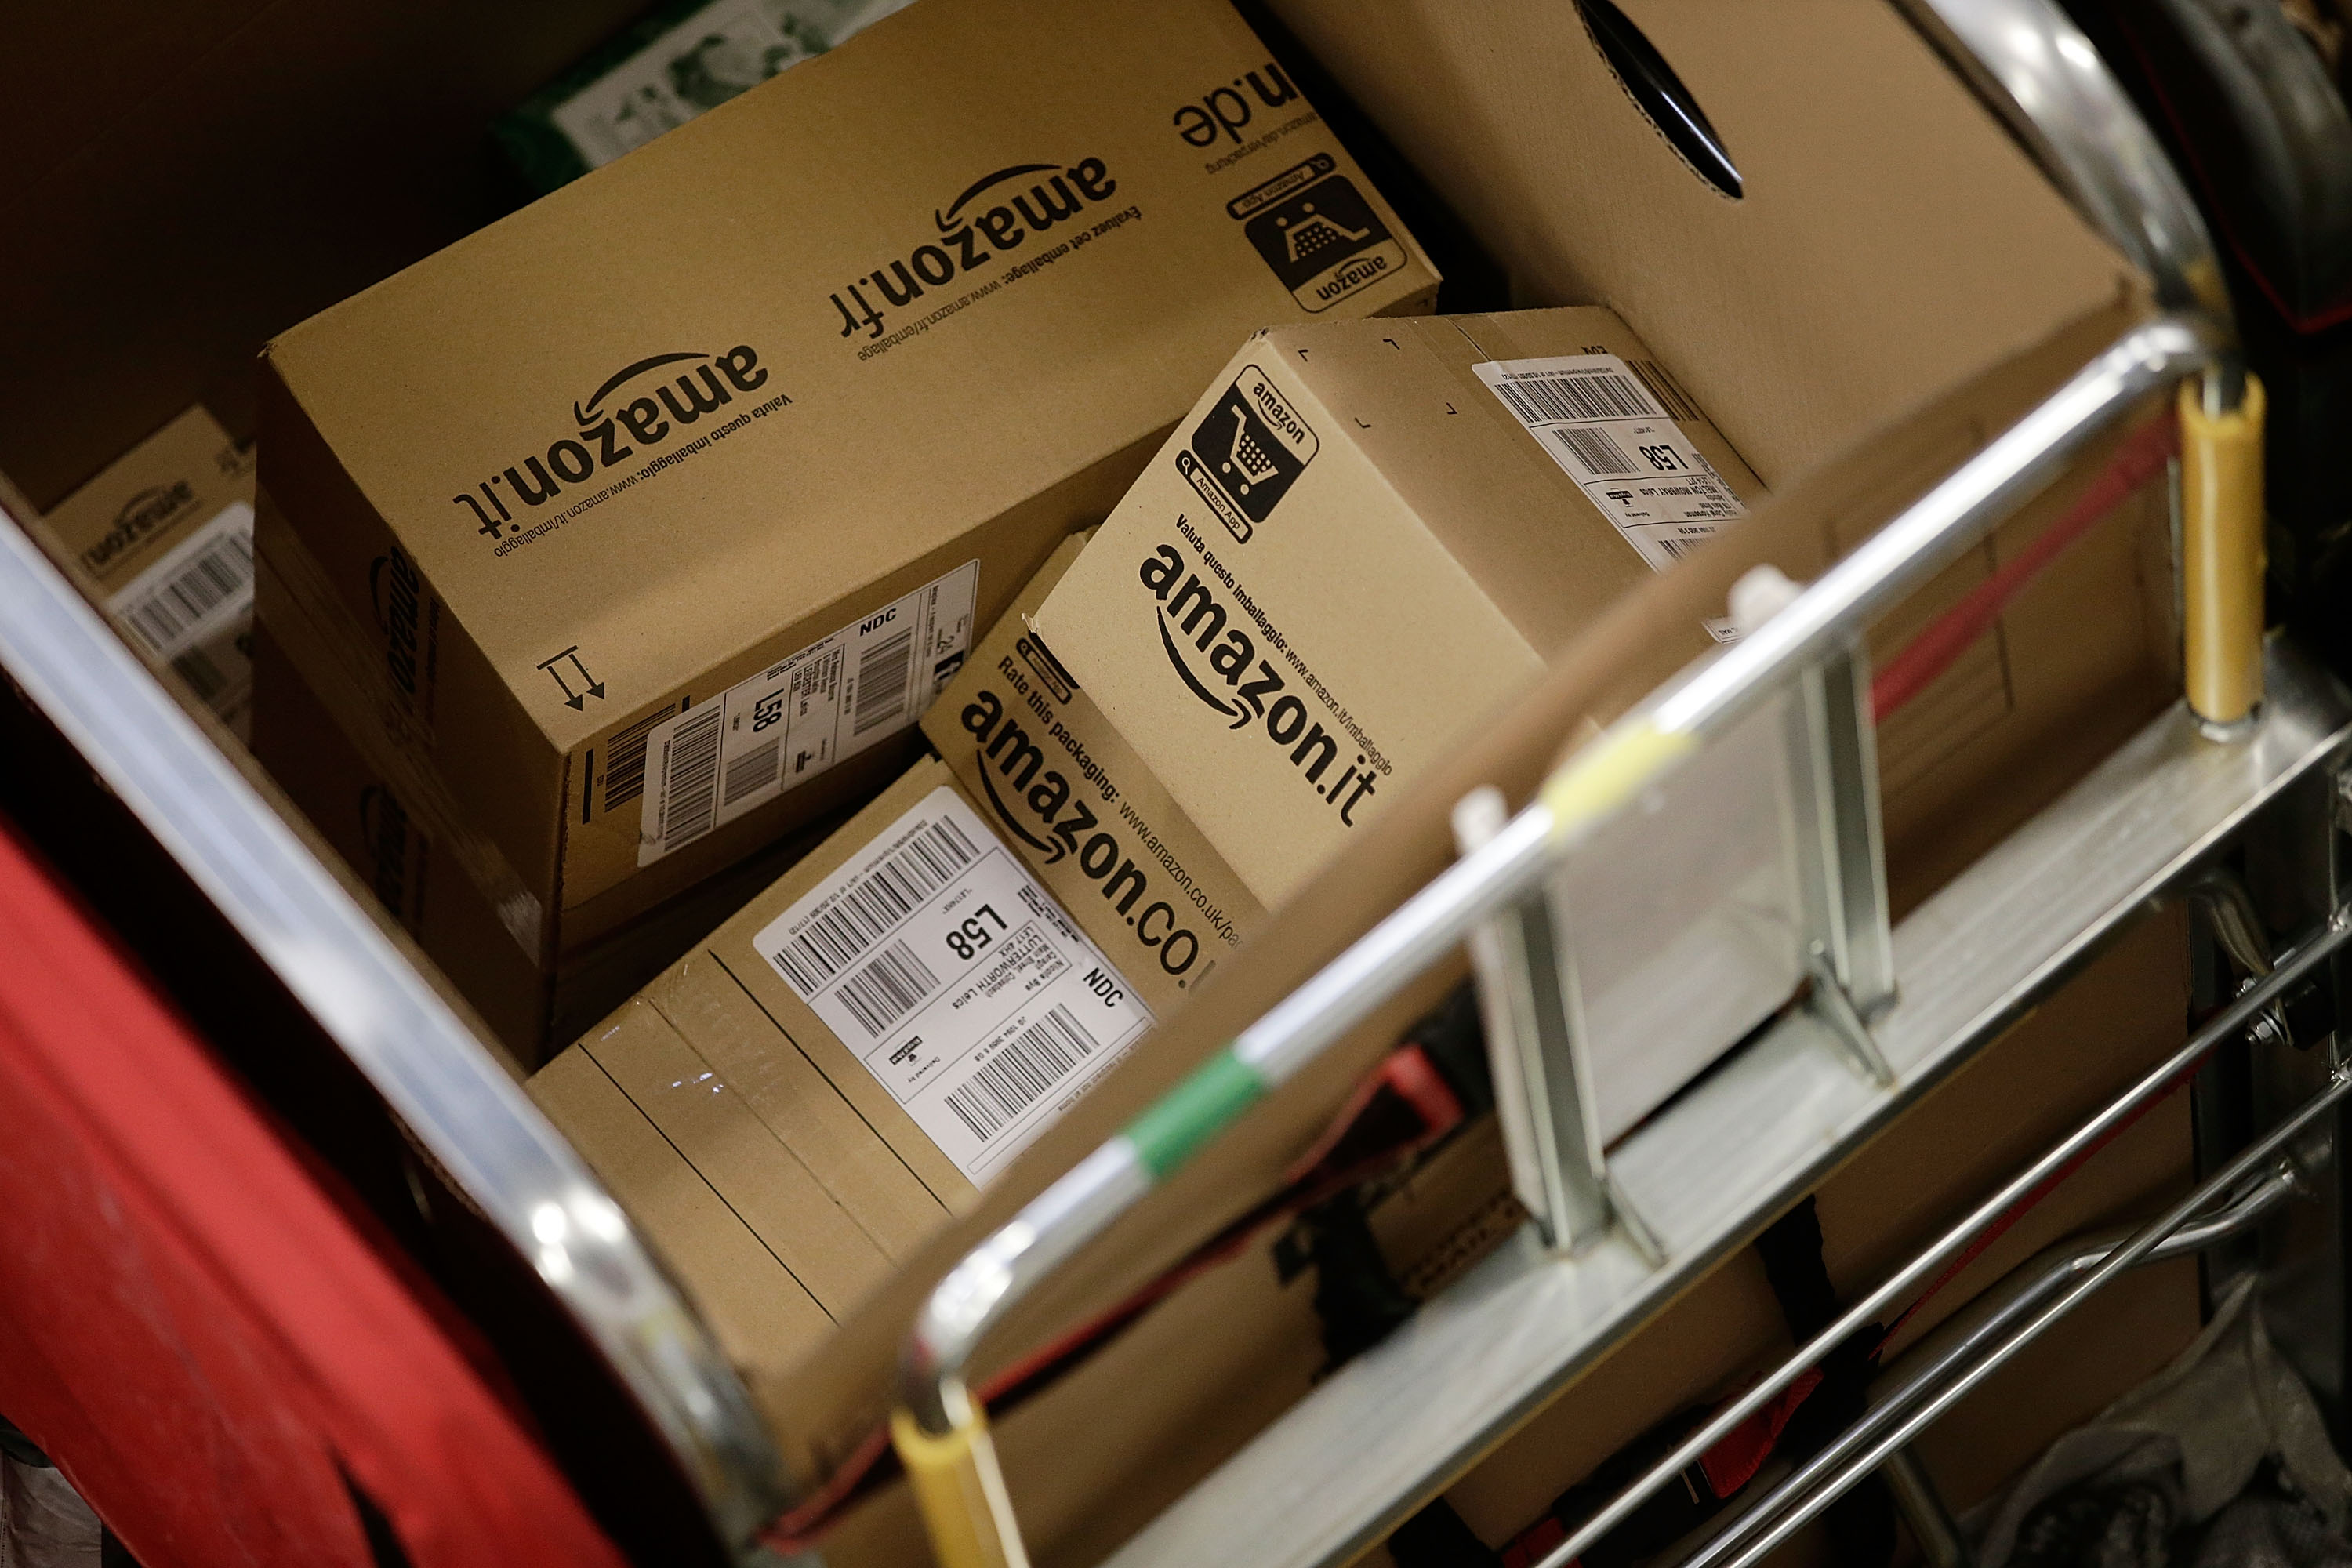 Amazon shipments in the packet and parcel section of the Royal Mail's Swan Valley mail centre on December 18, 2013 in Northampton, England. (Matthew Lloyd&mdash;Getty Images)